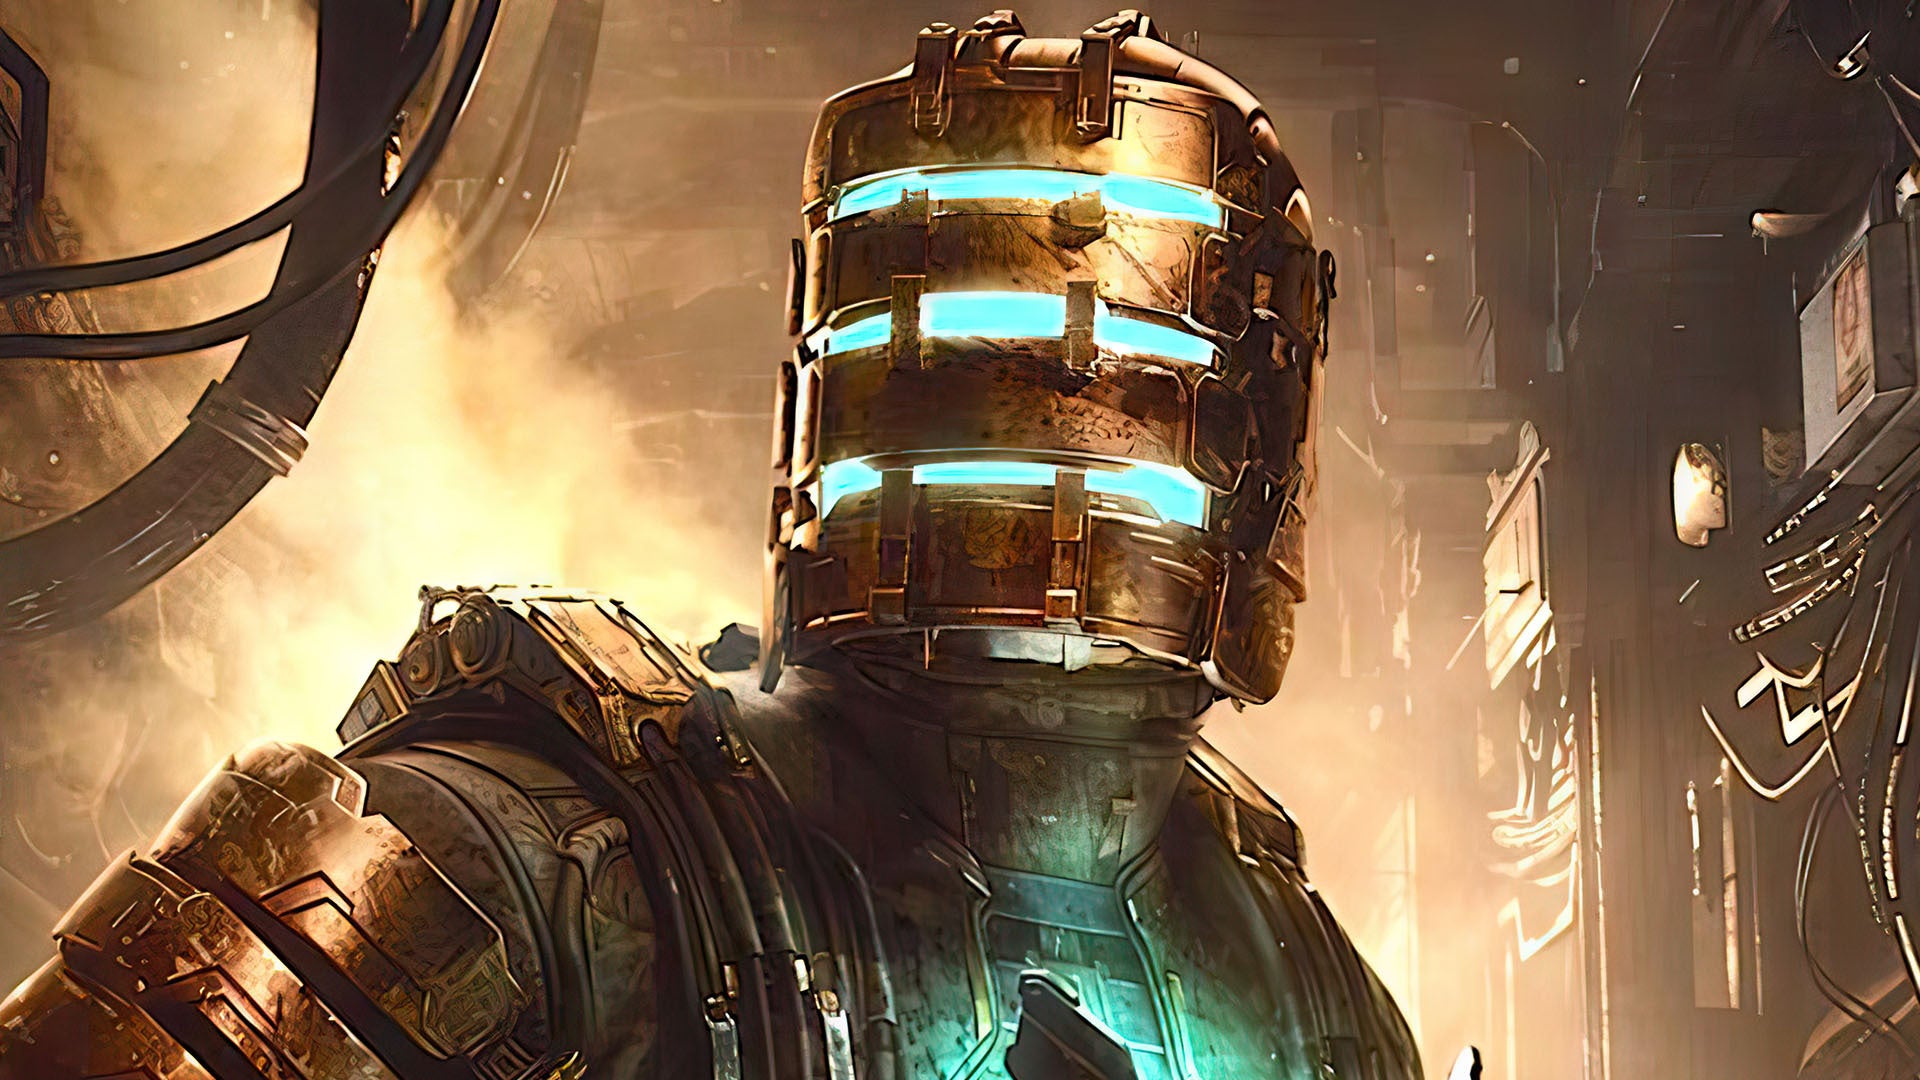 dead space remake key art showing the protagonist and his cool helmet